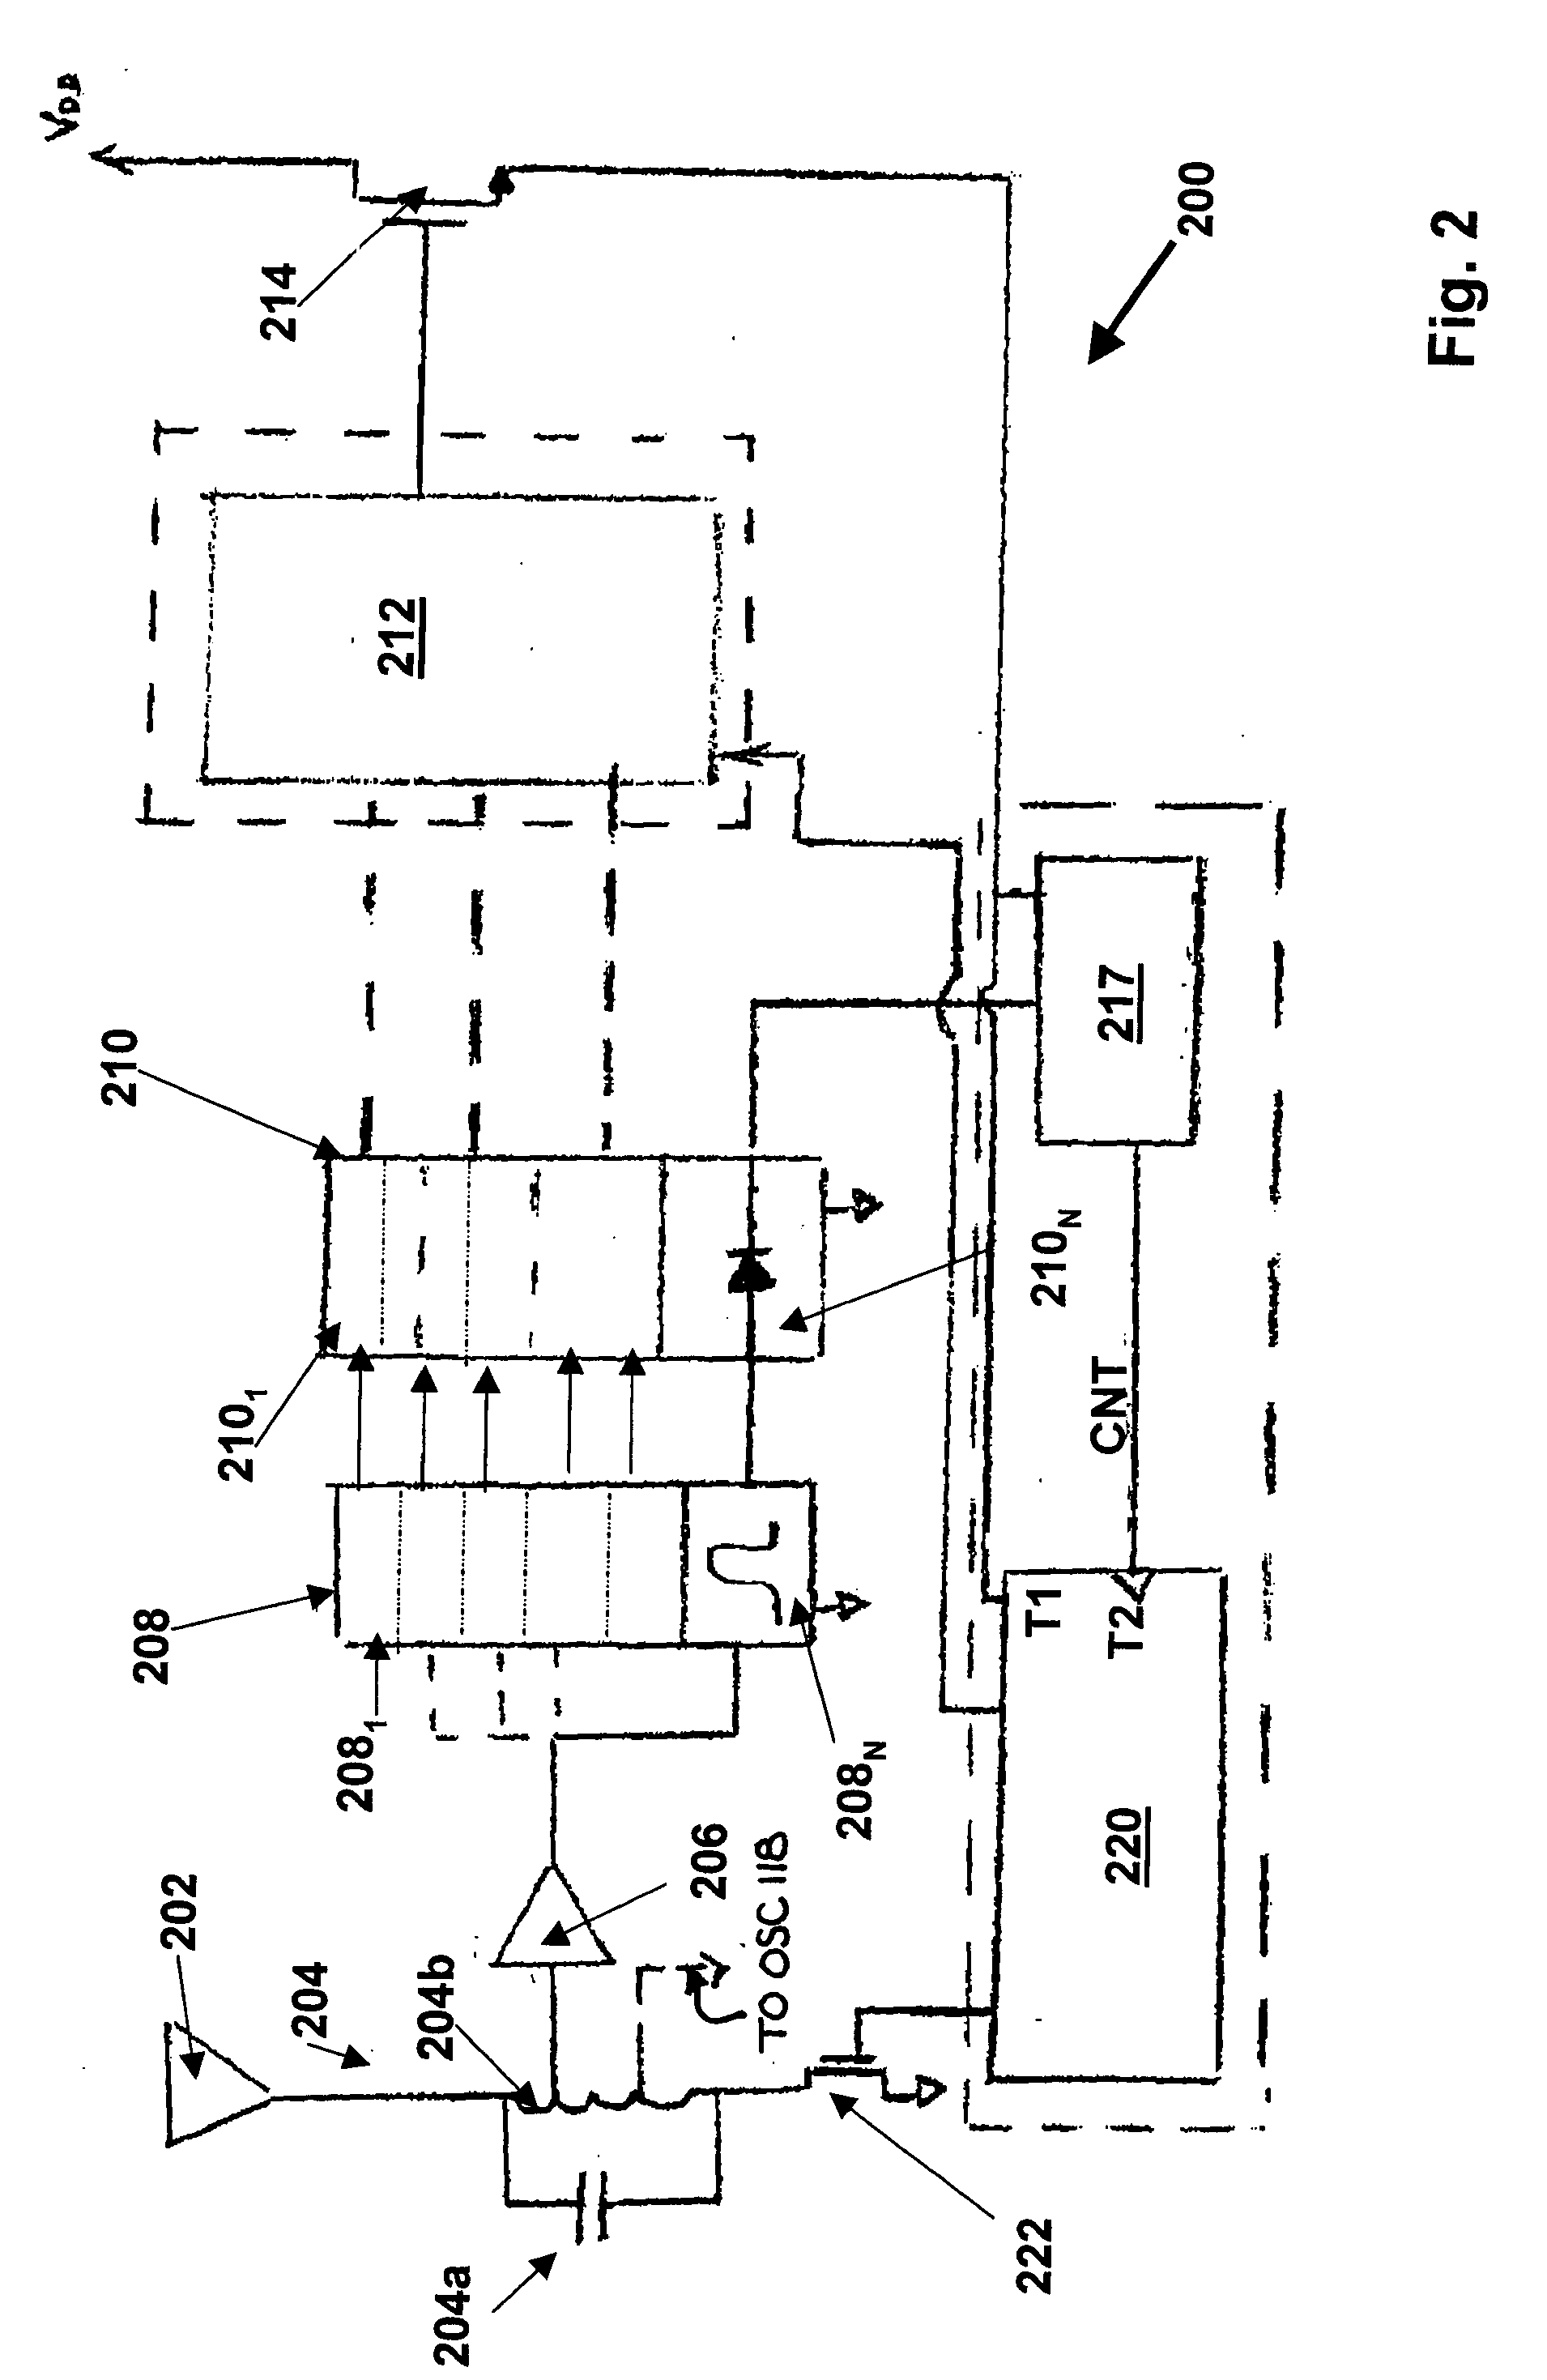 Continuous wave (CW) - fixed multiple frequency triggered, radio frequency identification (RFID) tag and system and method employing same